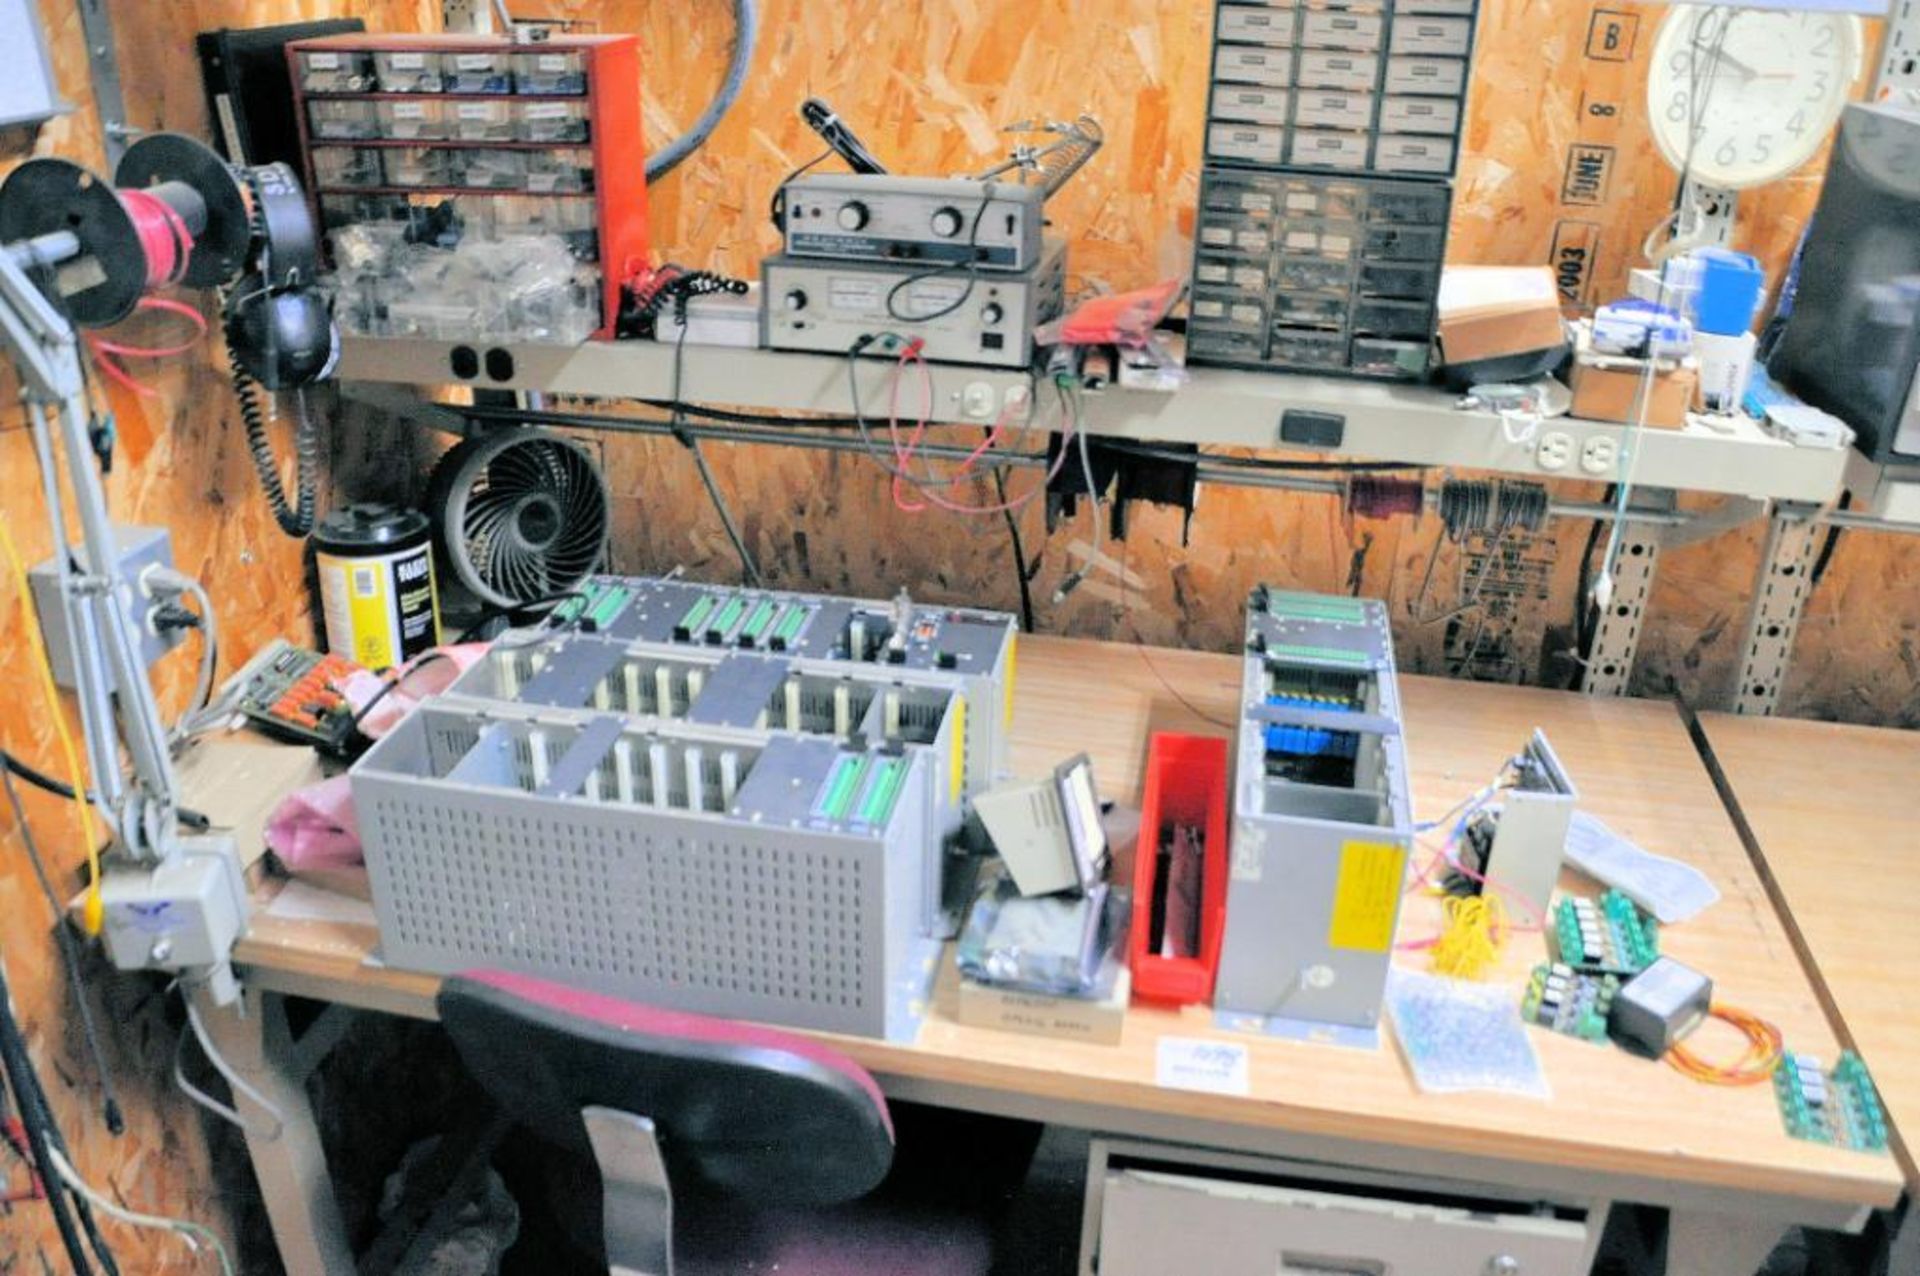 Lot - (3) Benches with Oscilloscope, Hardware Bin Cabinets, Electronic Parts, Drill Sharpener and Ro - Image 3 of 3